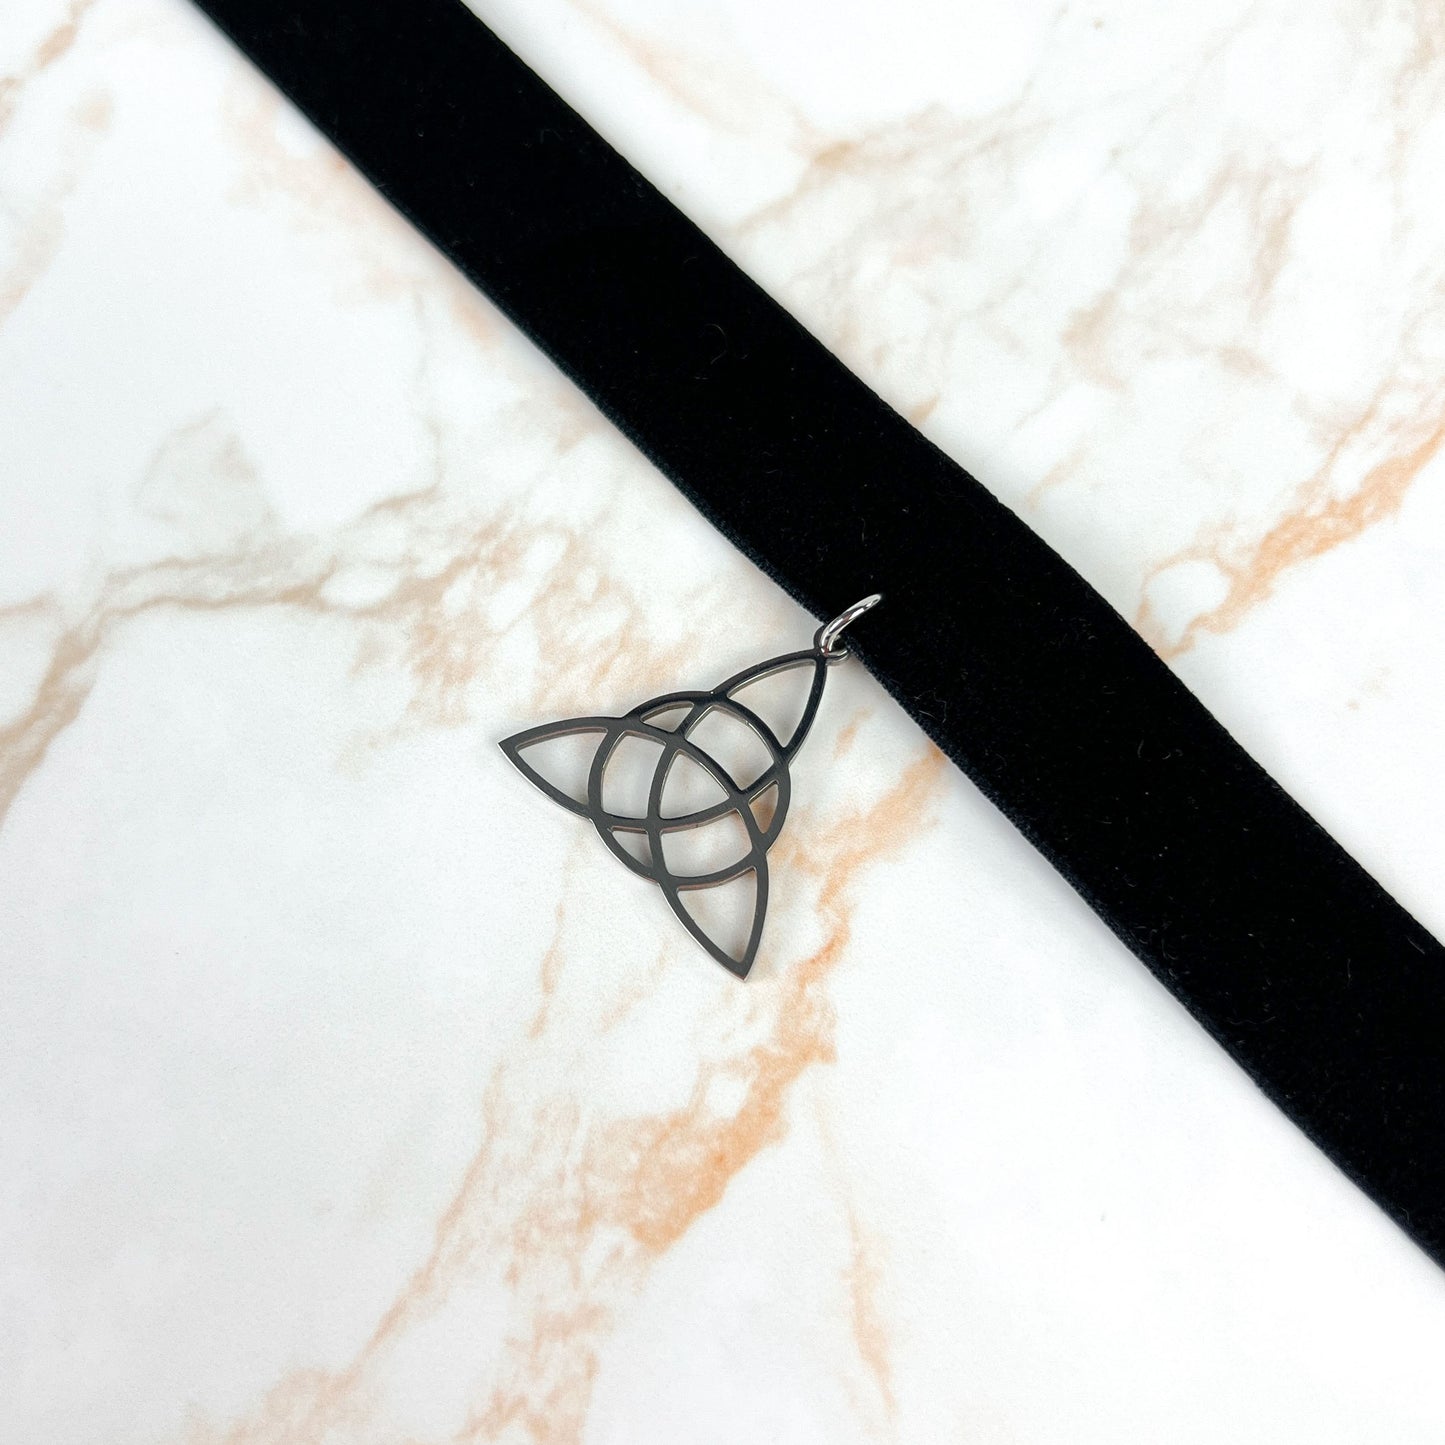 Black velvet and Triquetra Victorian Gothic choker, stainless steel Baguette Magick